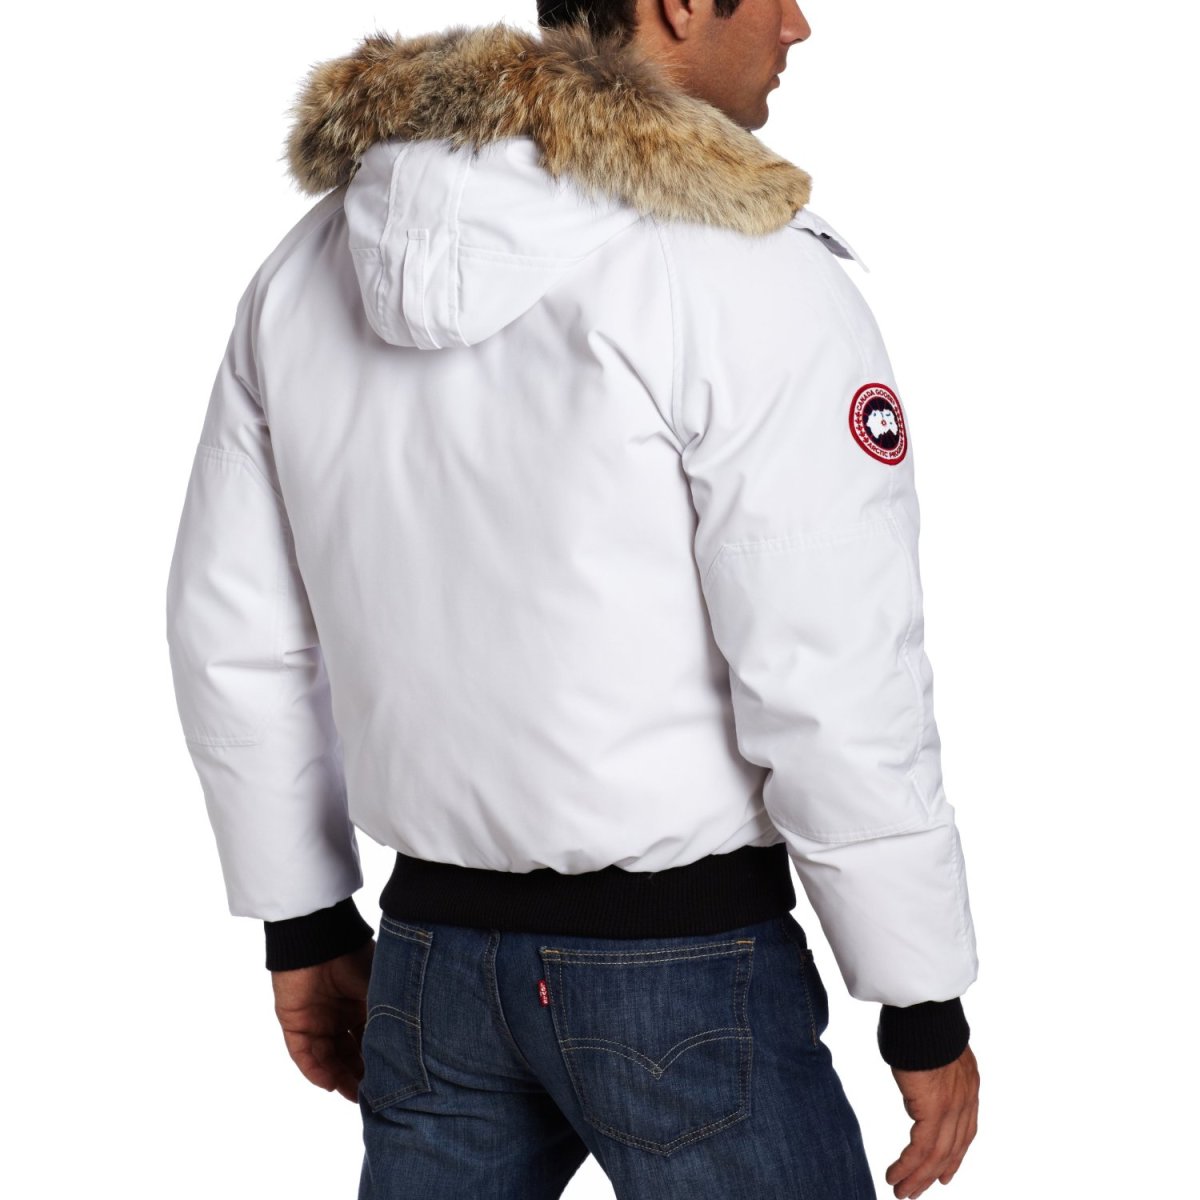 Canada Goose victoria parka sale price - A Complete Review Of The Chilliwack Bomber Jacket By Canada Goose